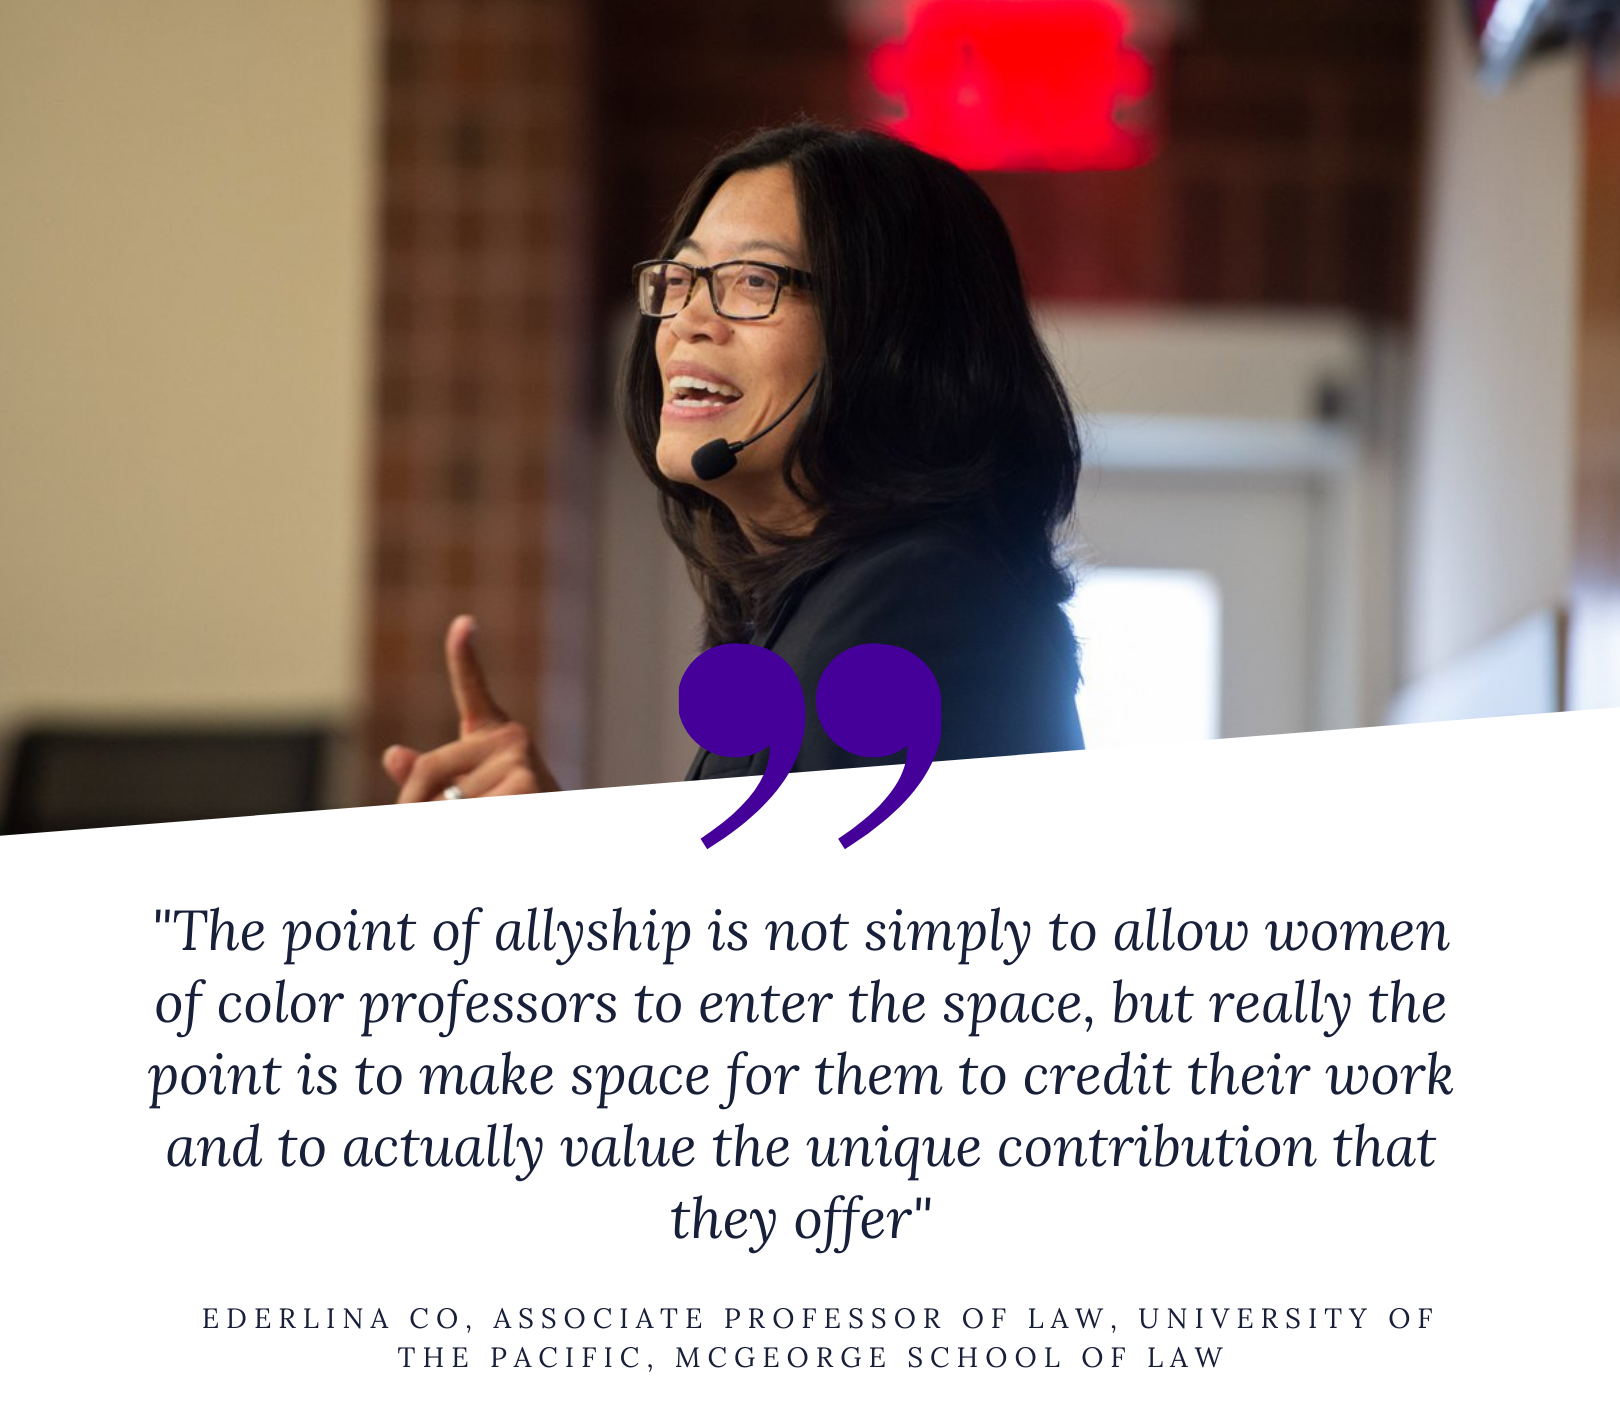 "The point of allyship is not simply to allow women of color professors to enter the space, but really the point is to make space for them to credit their work and to actually value the unique contribution that they offer" -  Ederlina Co, Associate Professor of Law, University of the Pacific, McGeorge School of Law